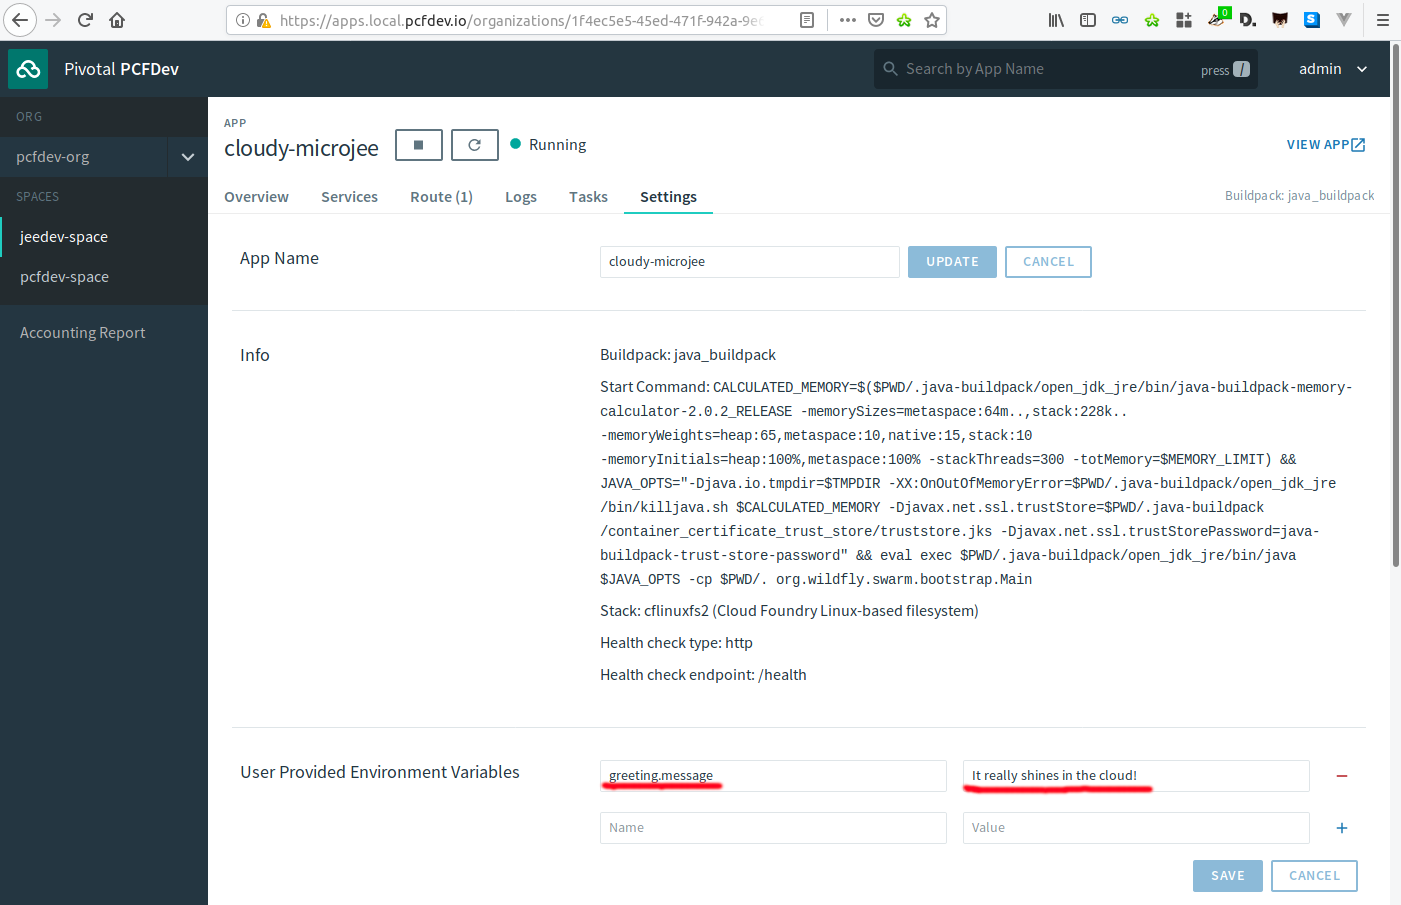 Adding a user provided variable in Pivotal Cloud Foundry Application Manager